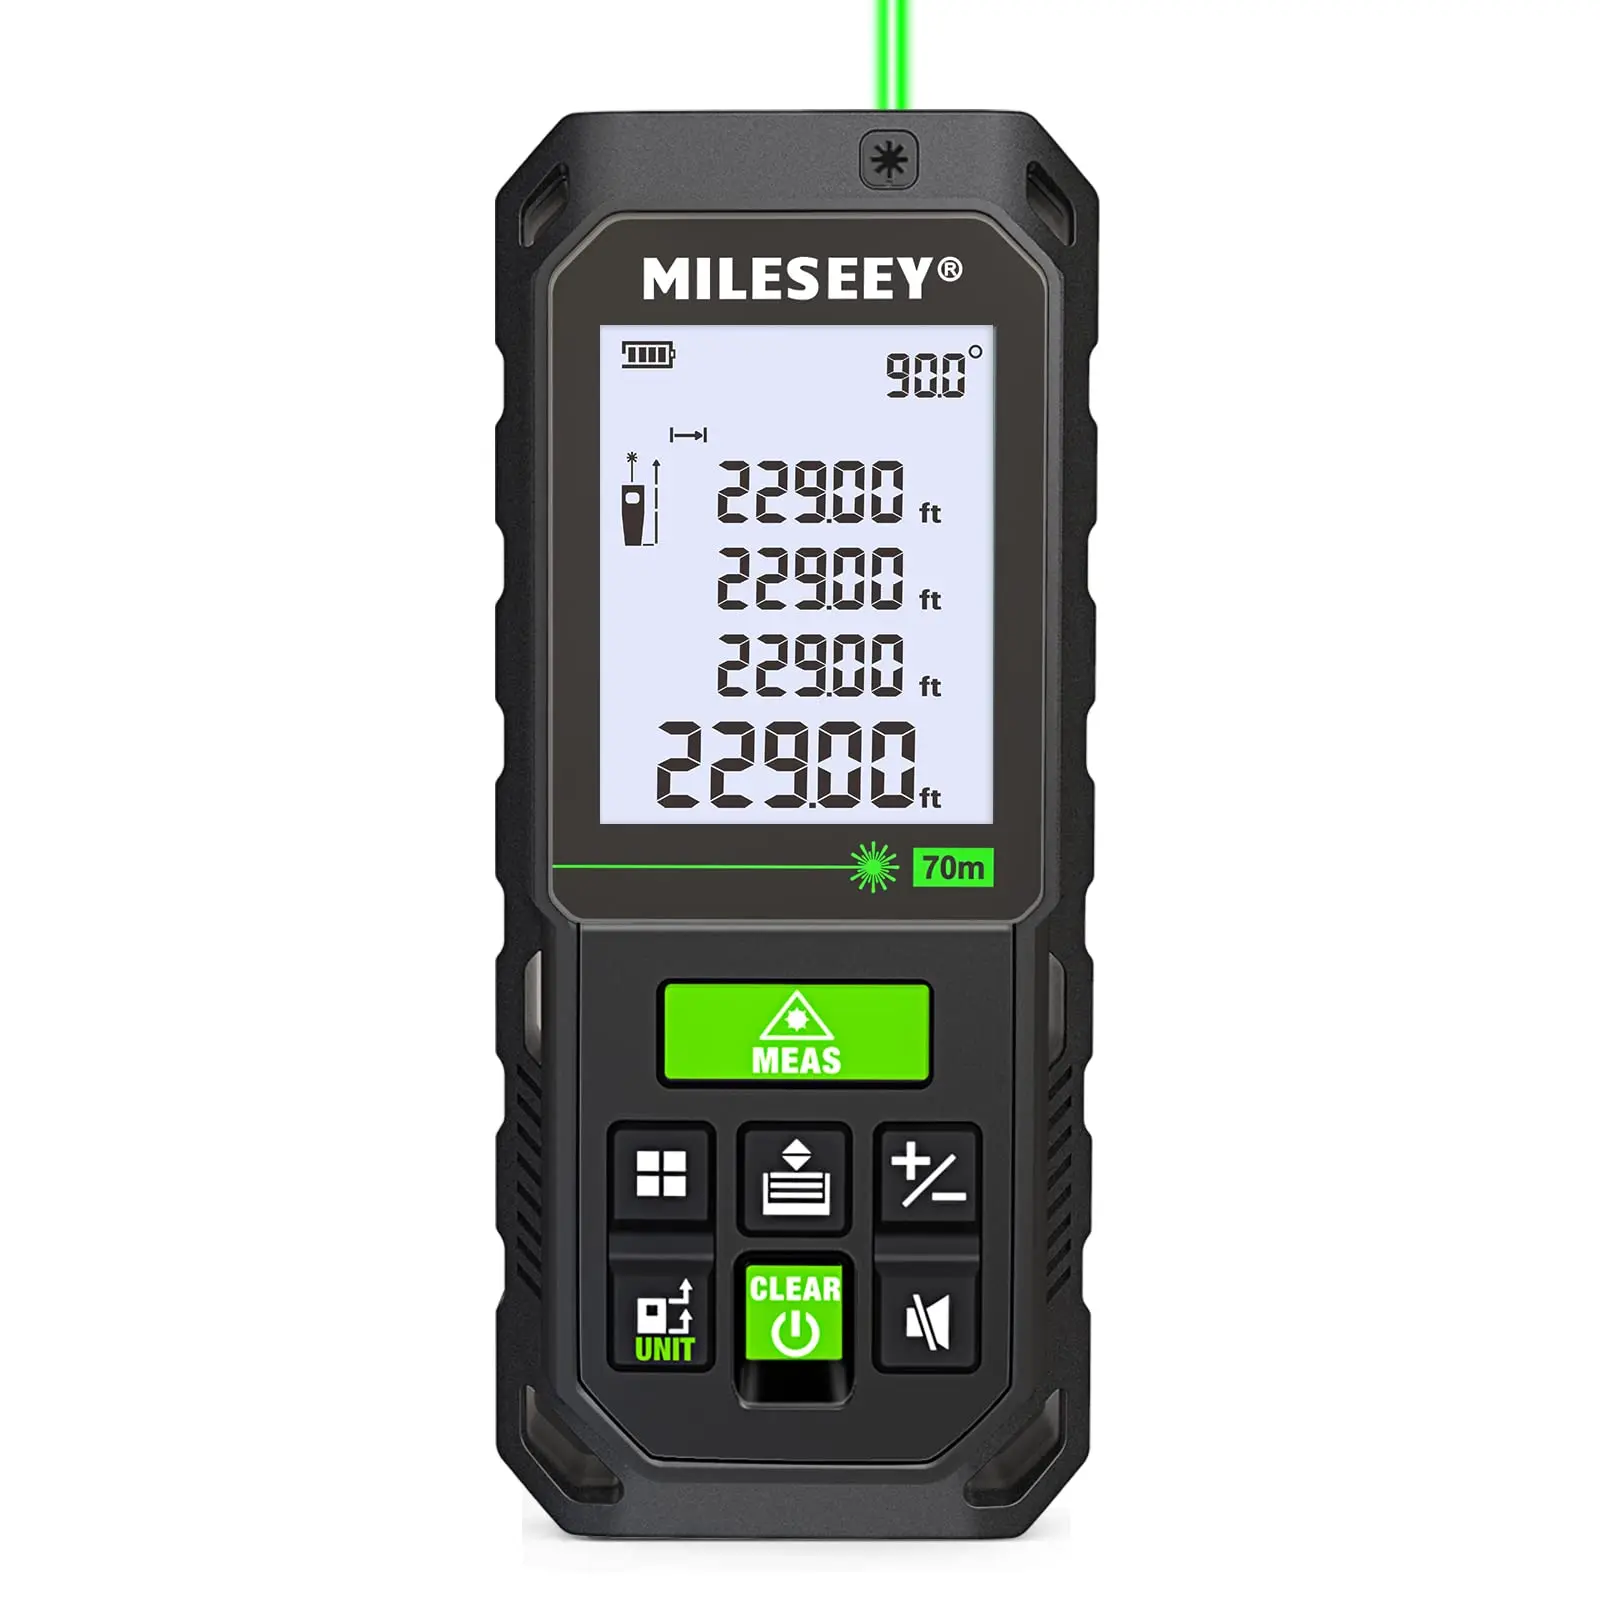 

MiLESEEY US Warehouse S8G IP65 Laser Digital Distance Measuring Meter Distance Meter with Backlit LCD High-precision Distance